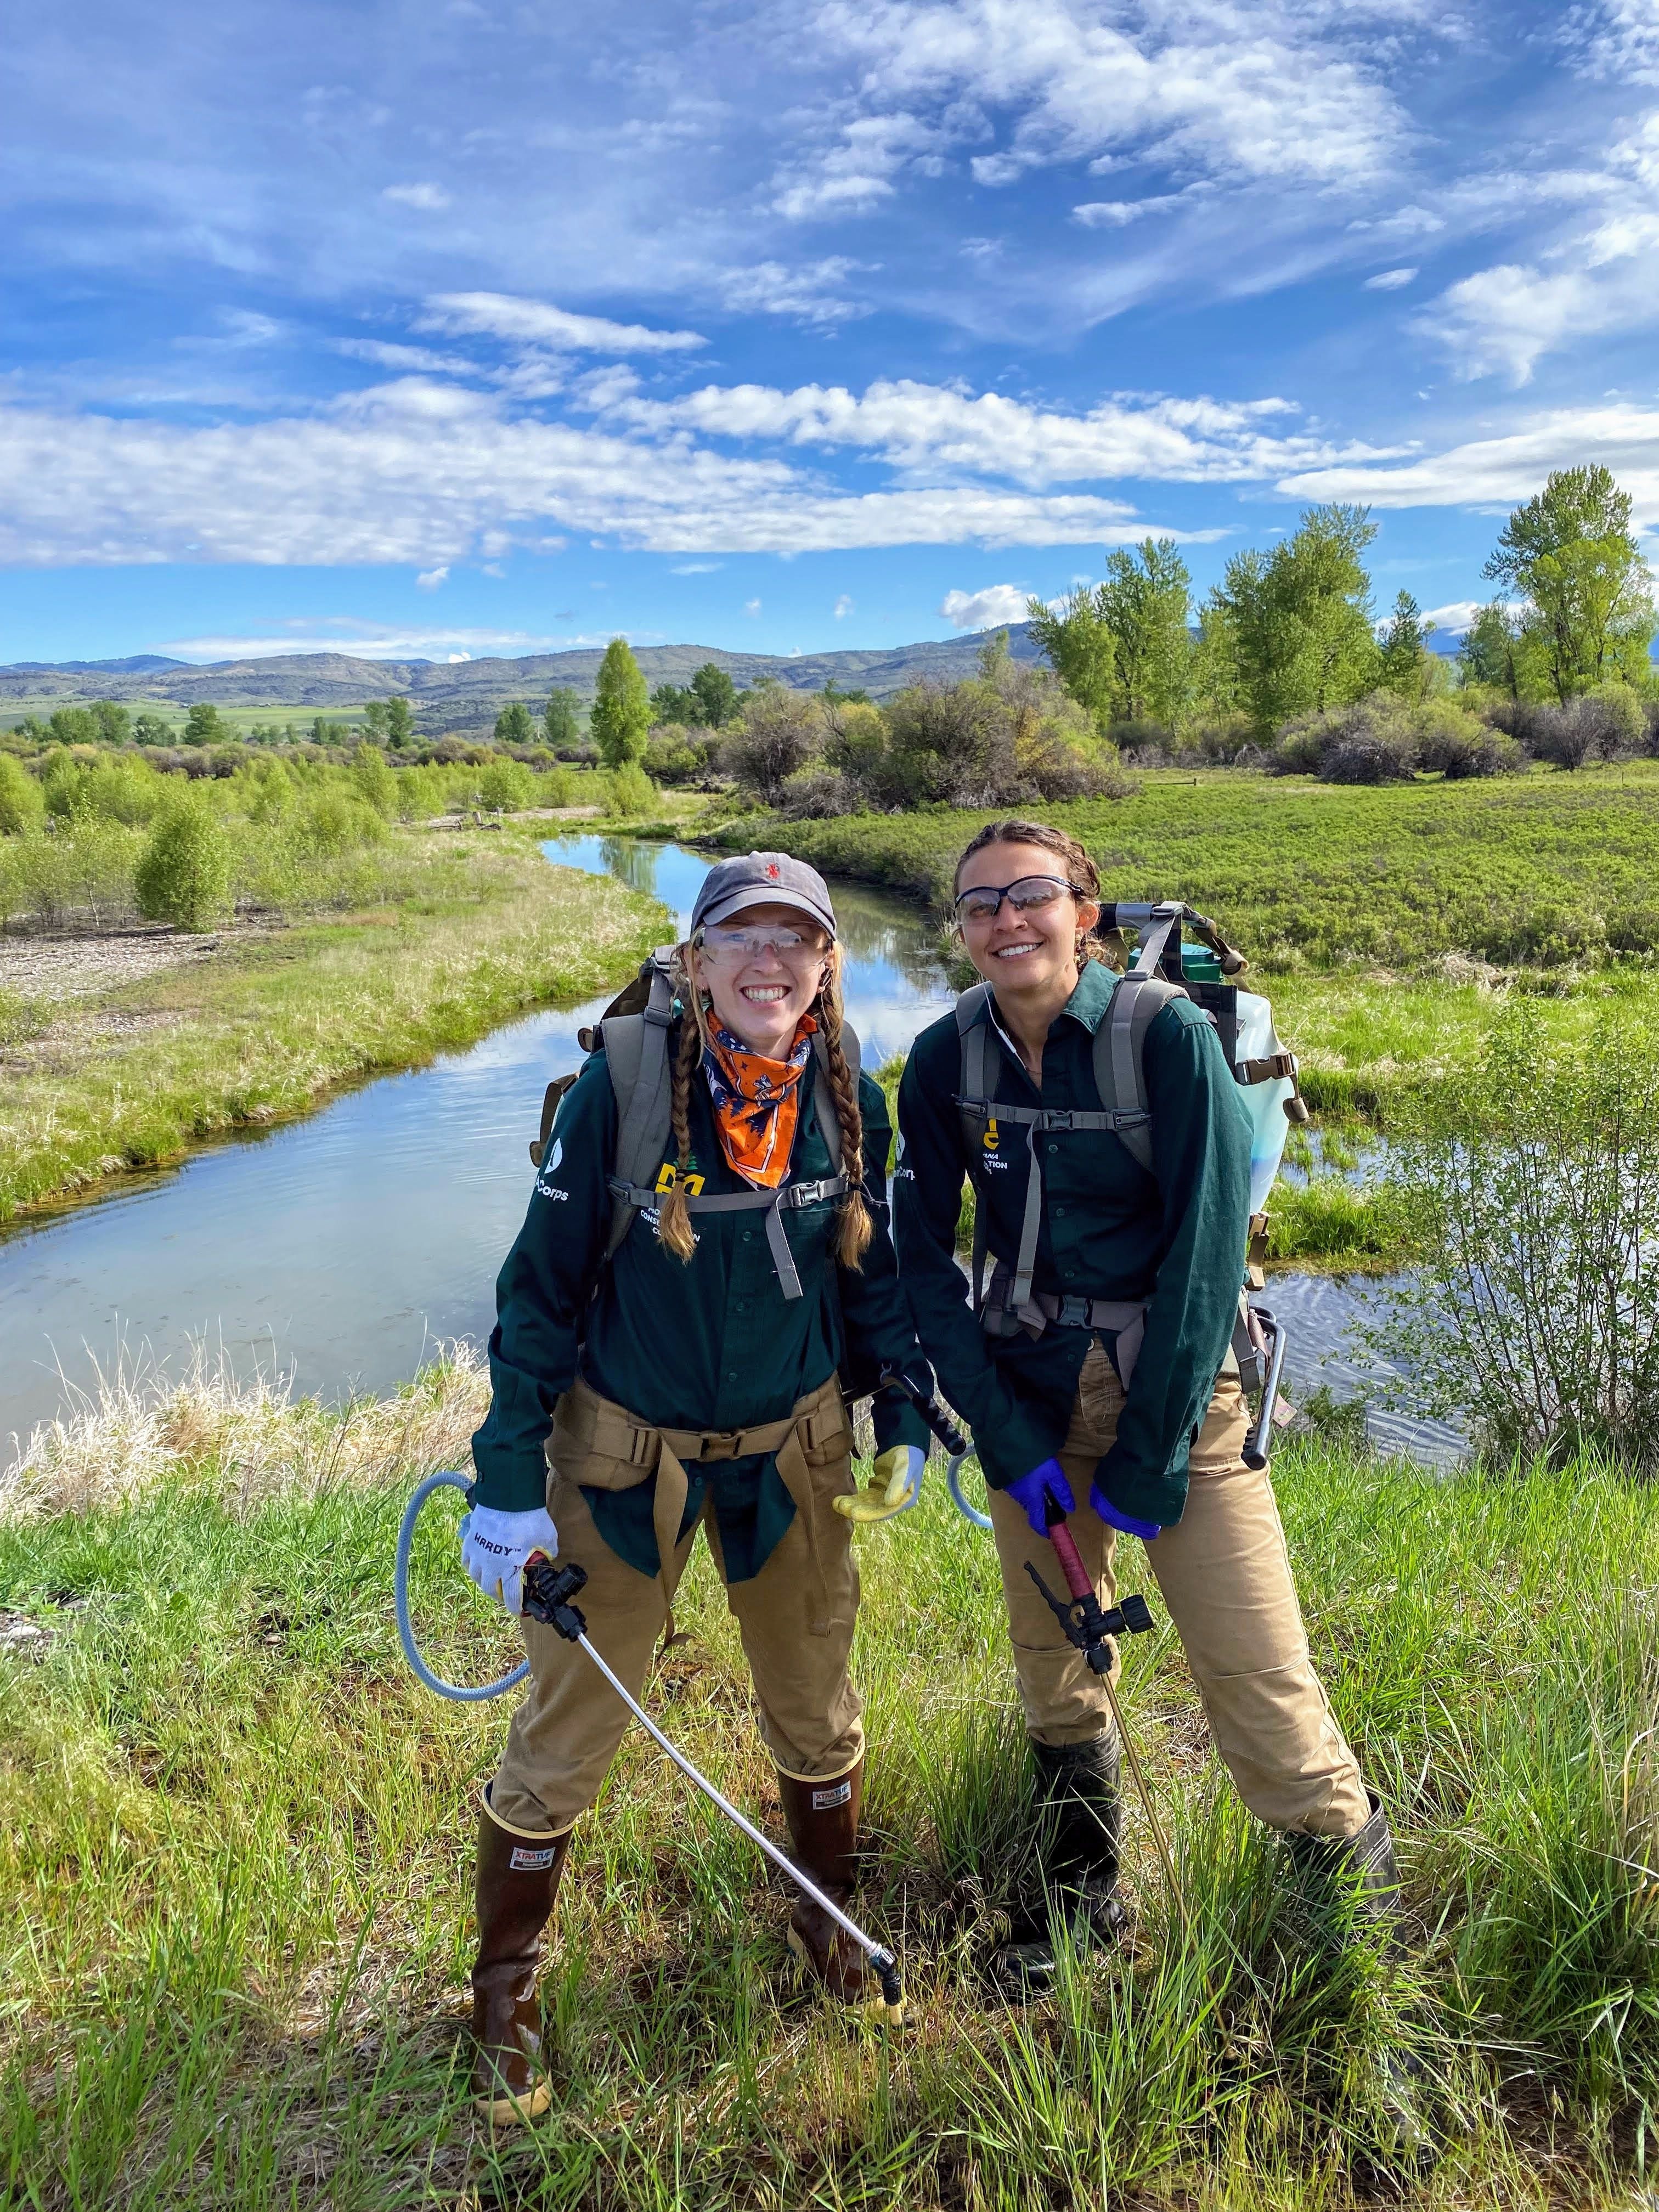 The Silver Crew Tackles Noxious Weeds with the Gallatin Valley Land Trust